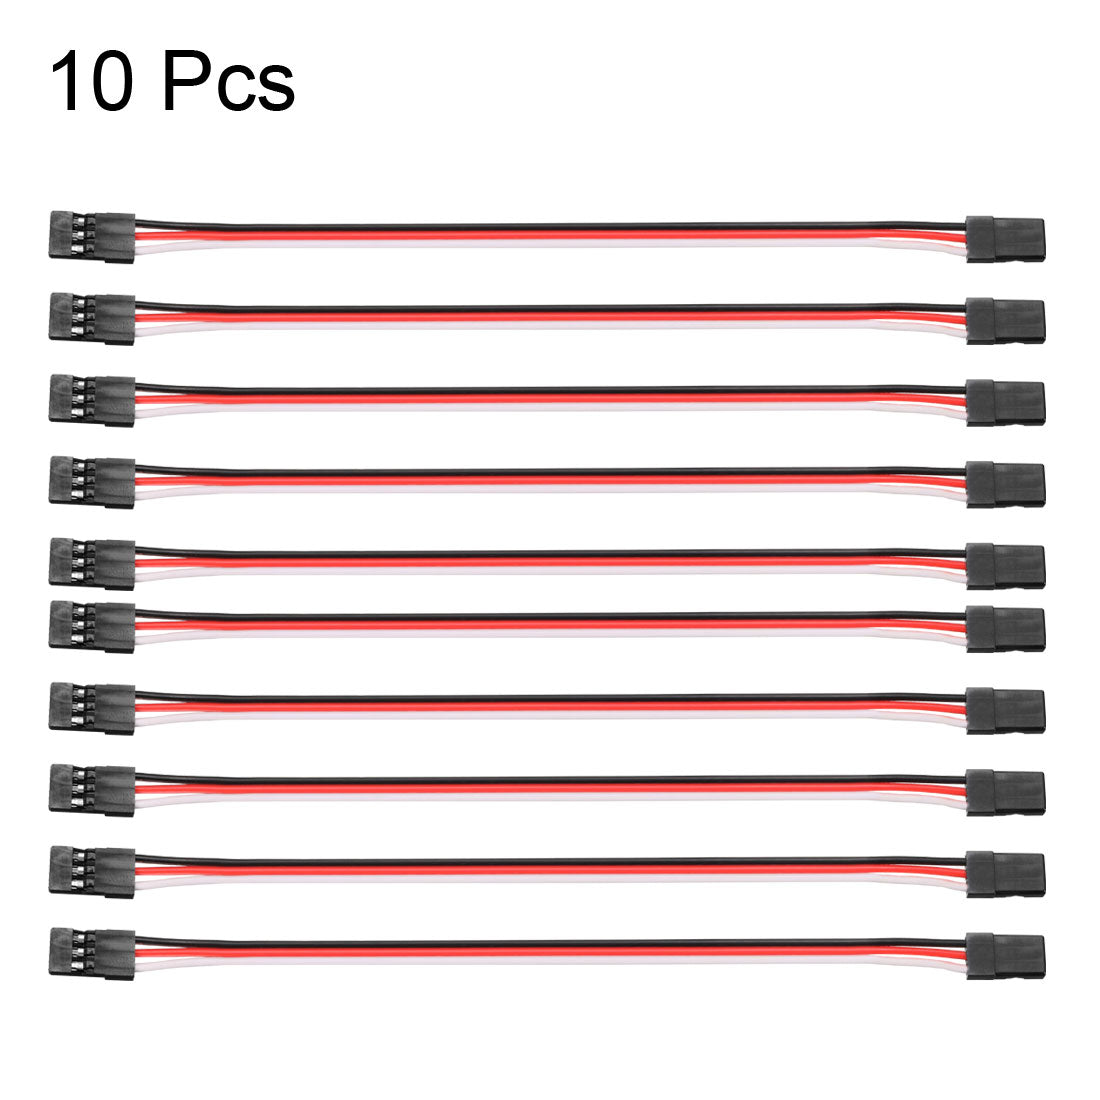 uxcell Uxcell 10Pcs 18CM 3-Pin Male to Male Lead Servo Extension Cable Cord Connectors, 26AWG 30-Cores Wire for RC Futaba JR Servo